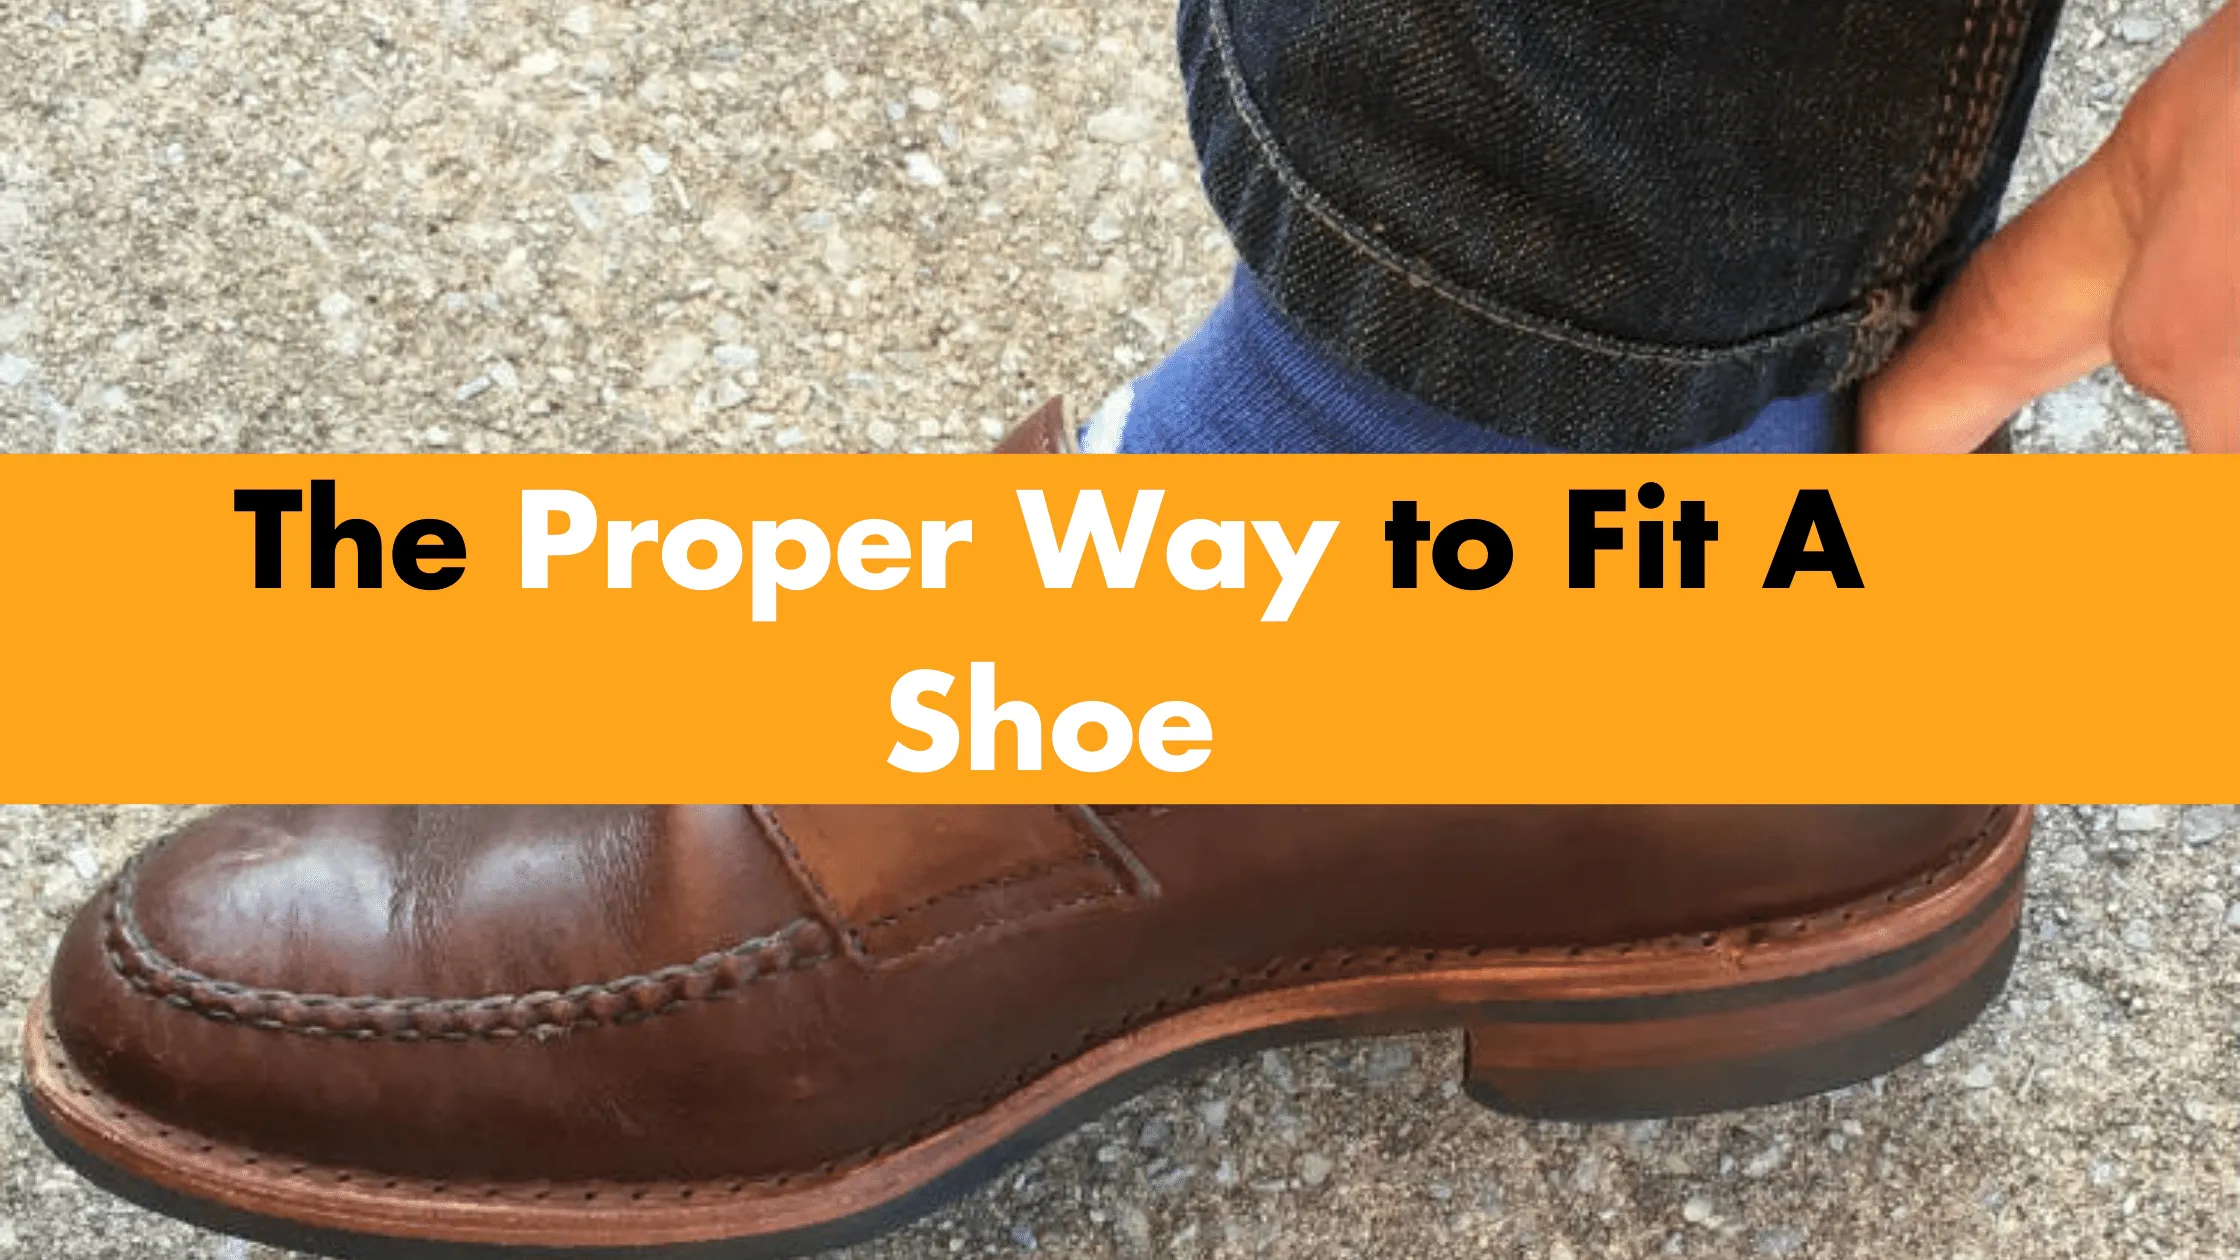 The Proper Way to Fit A Shoe